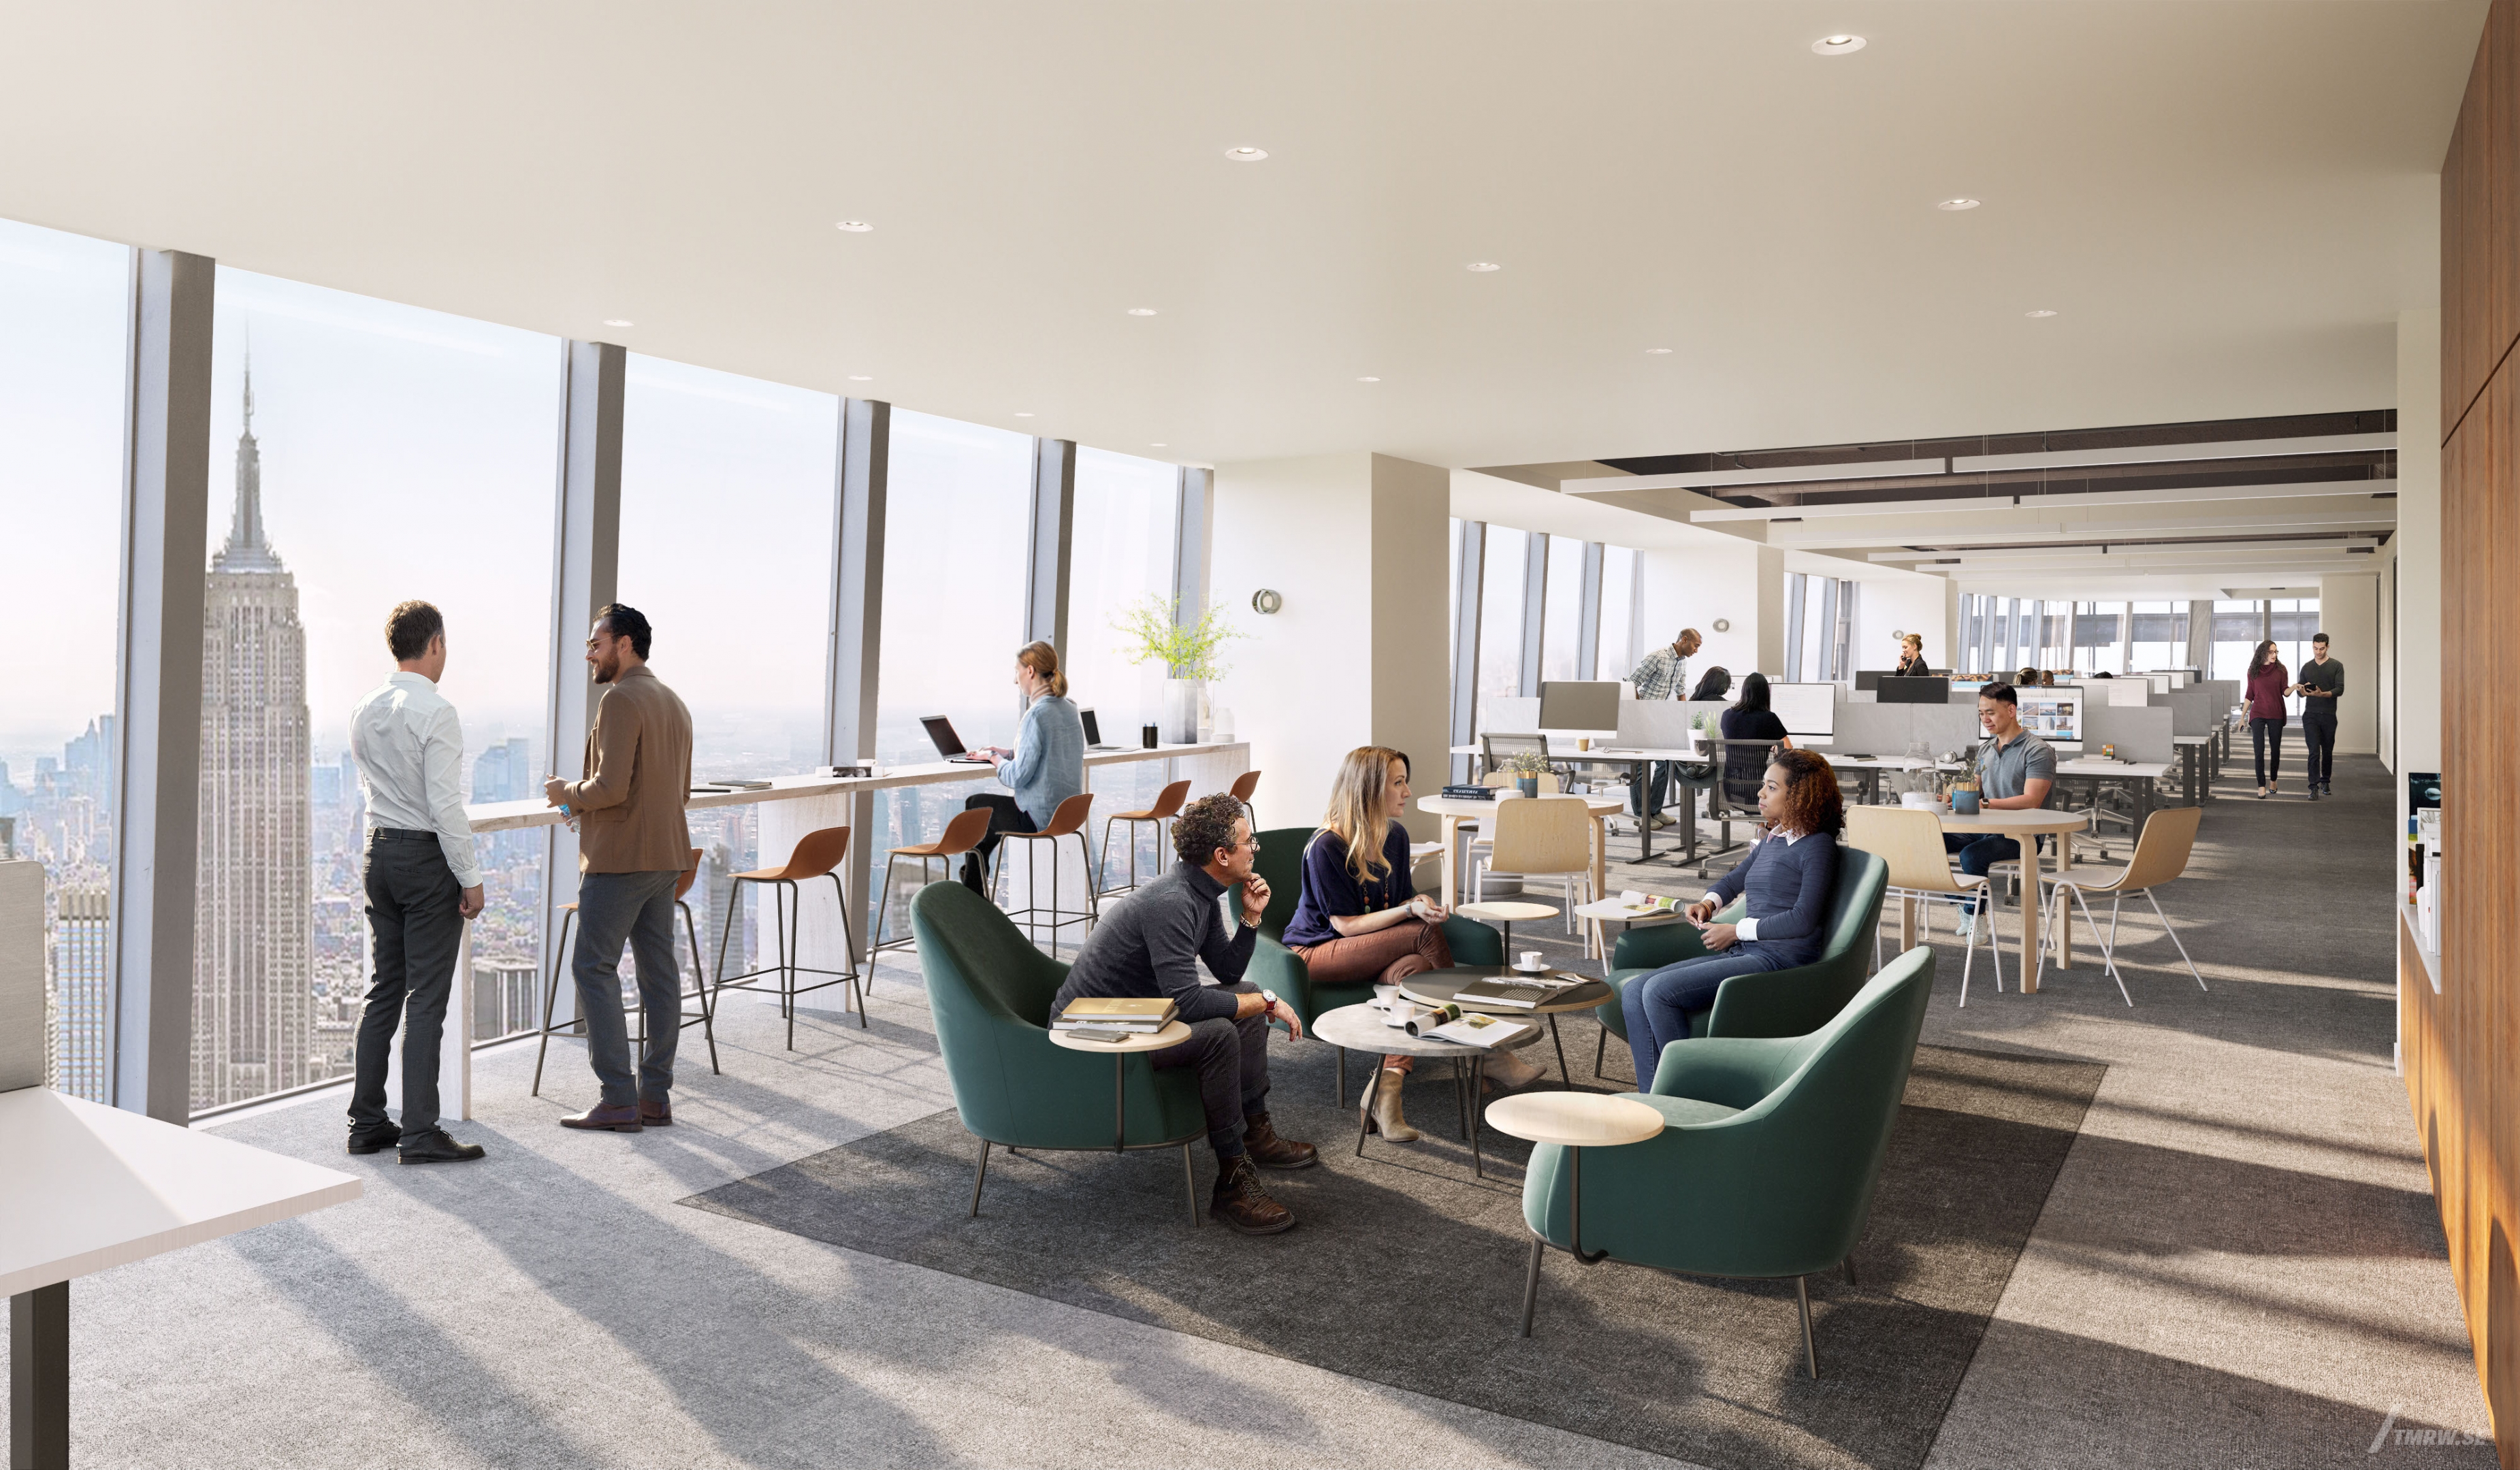 Architectural visualization of OMW for Brookfield Properties. An image of the interior of a office with people sitting in a lounge group in daylight.